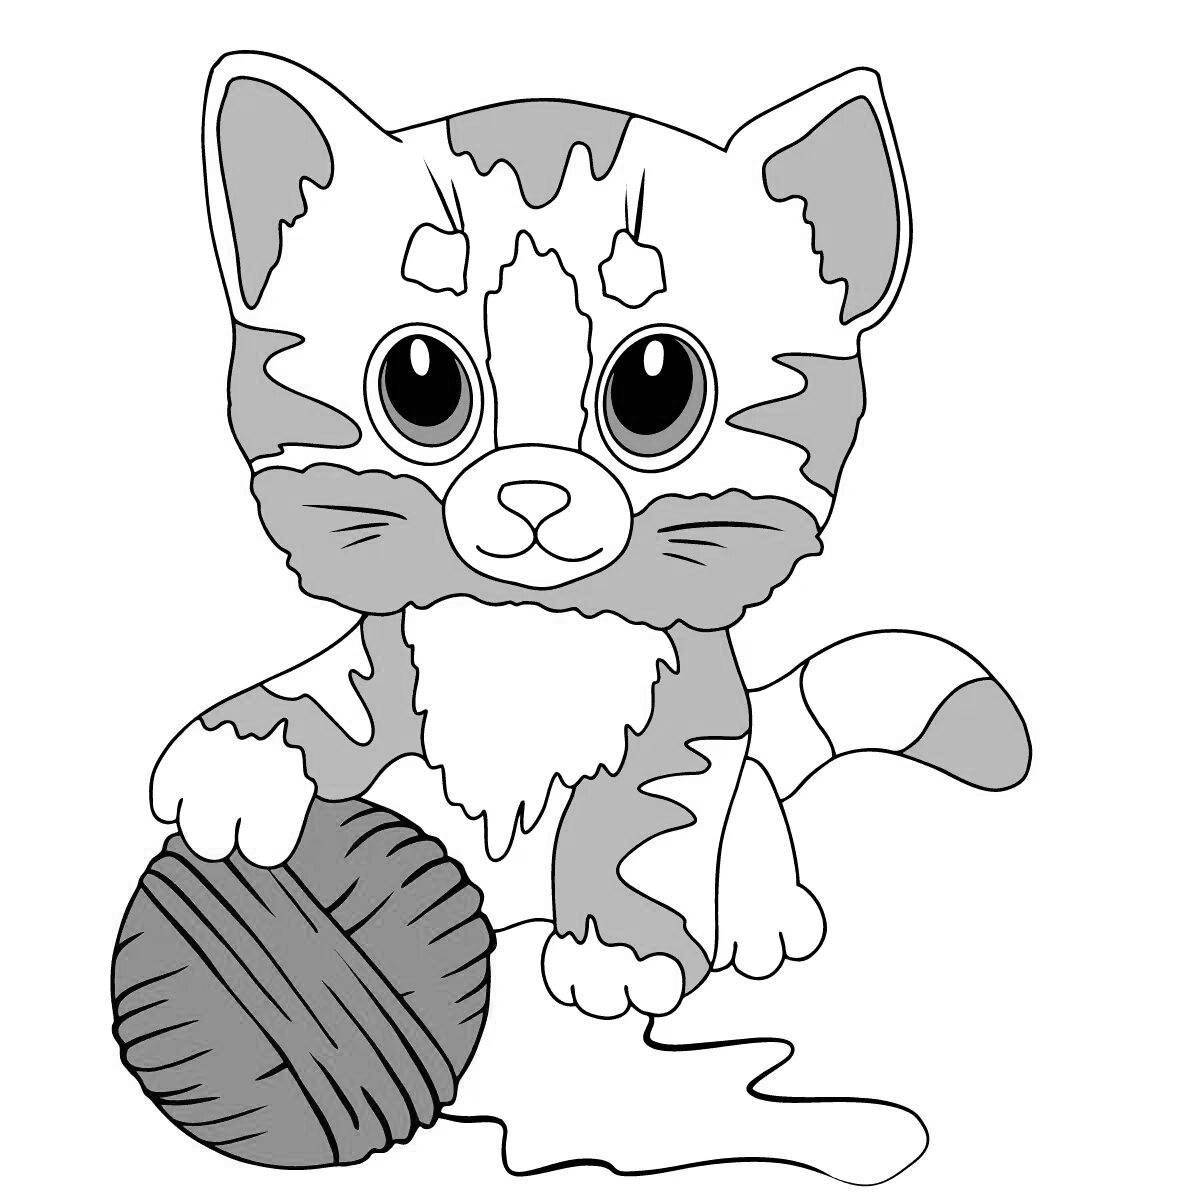 Coloring book loving kitten with a ball